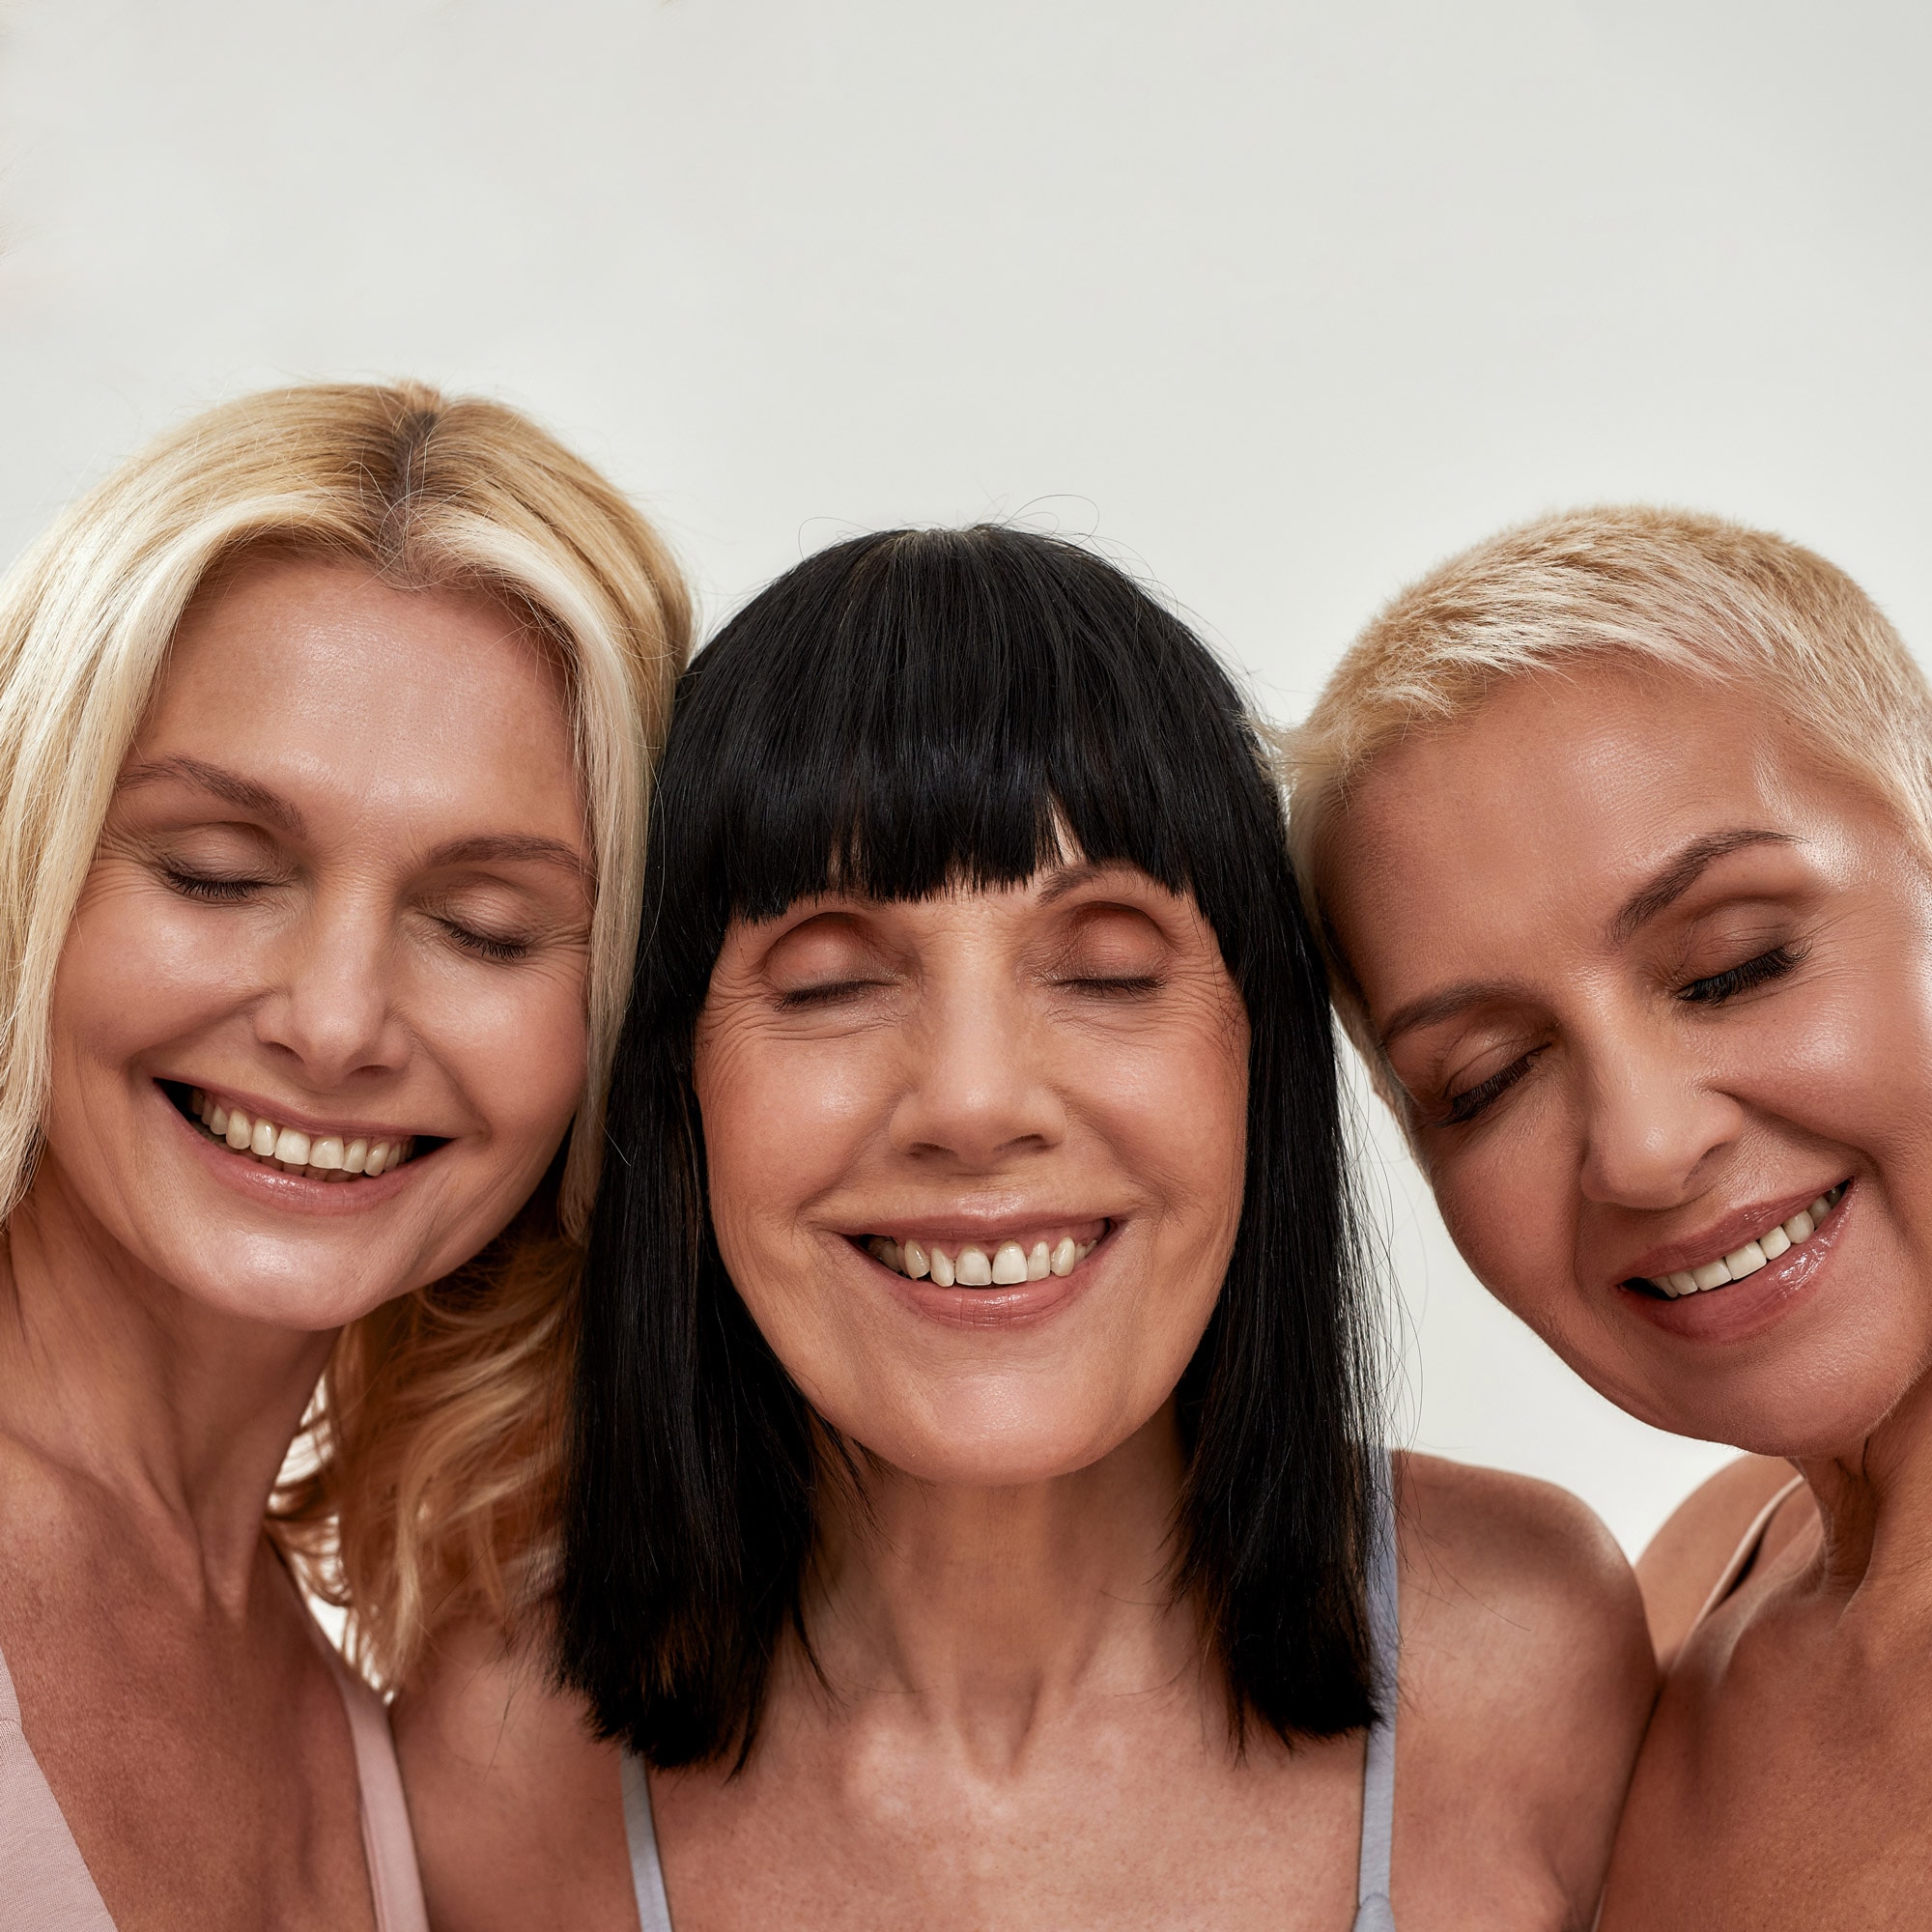 Three women enjoy smooth, clear skin, free from sunspots, age spots and pigmentation after treatments with Lumecca